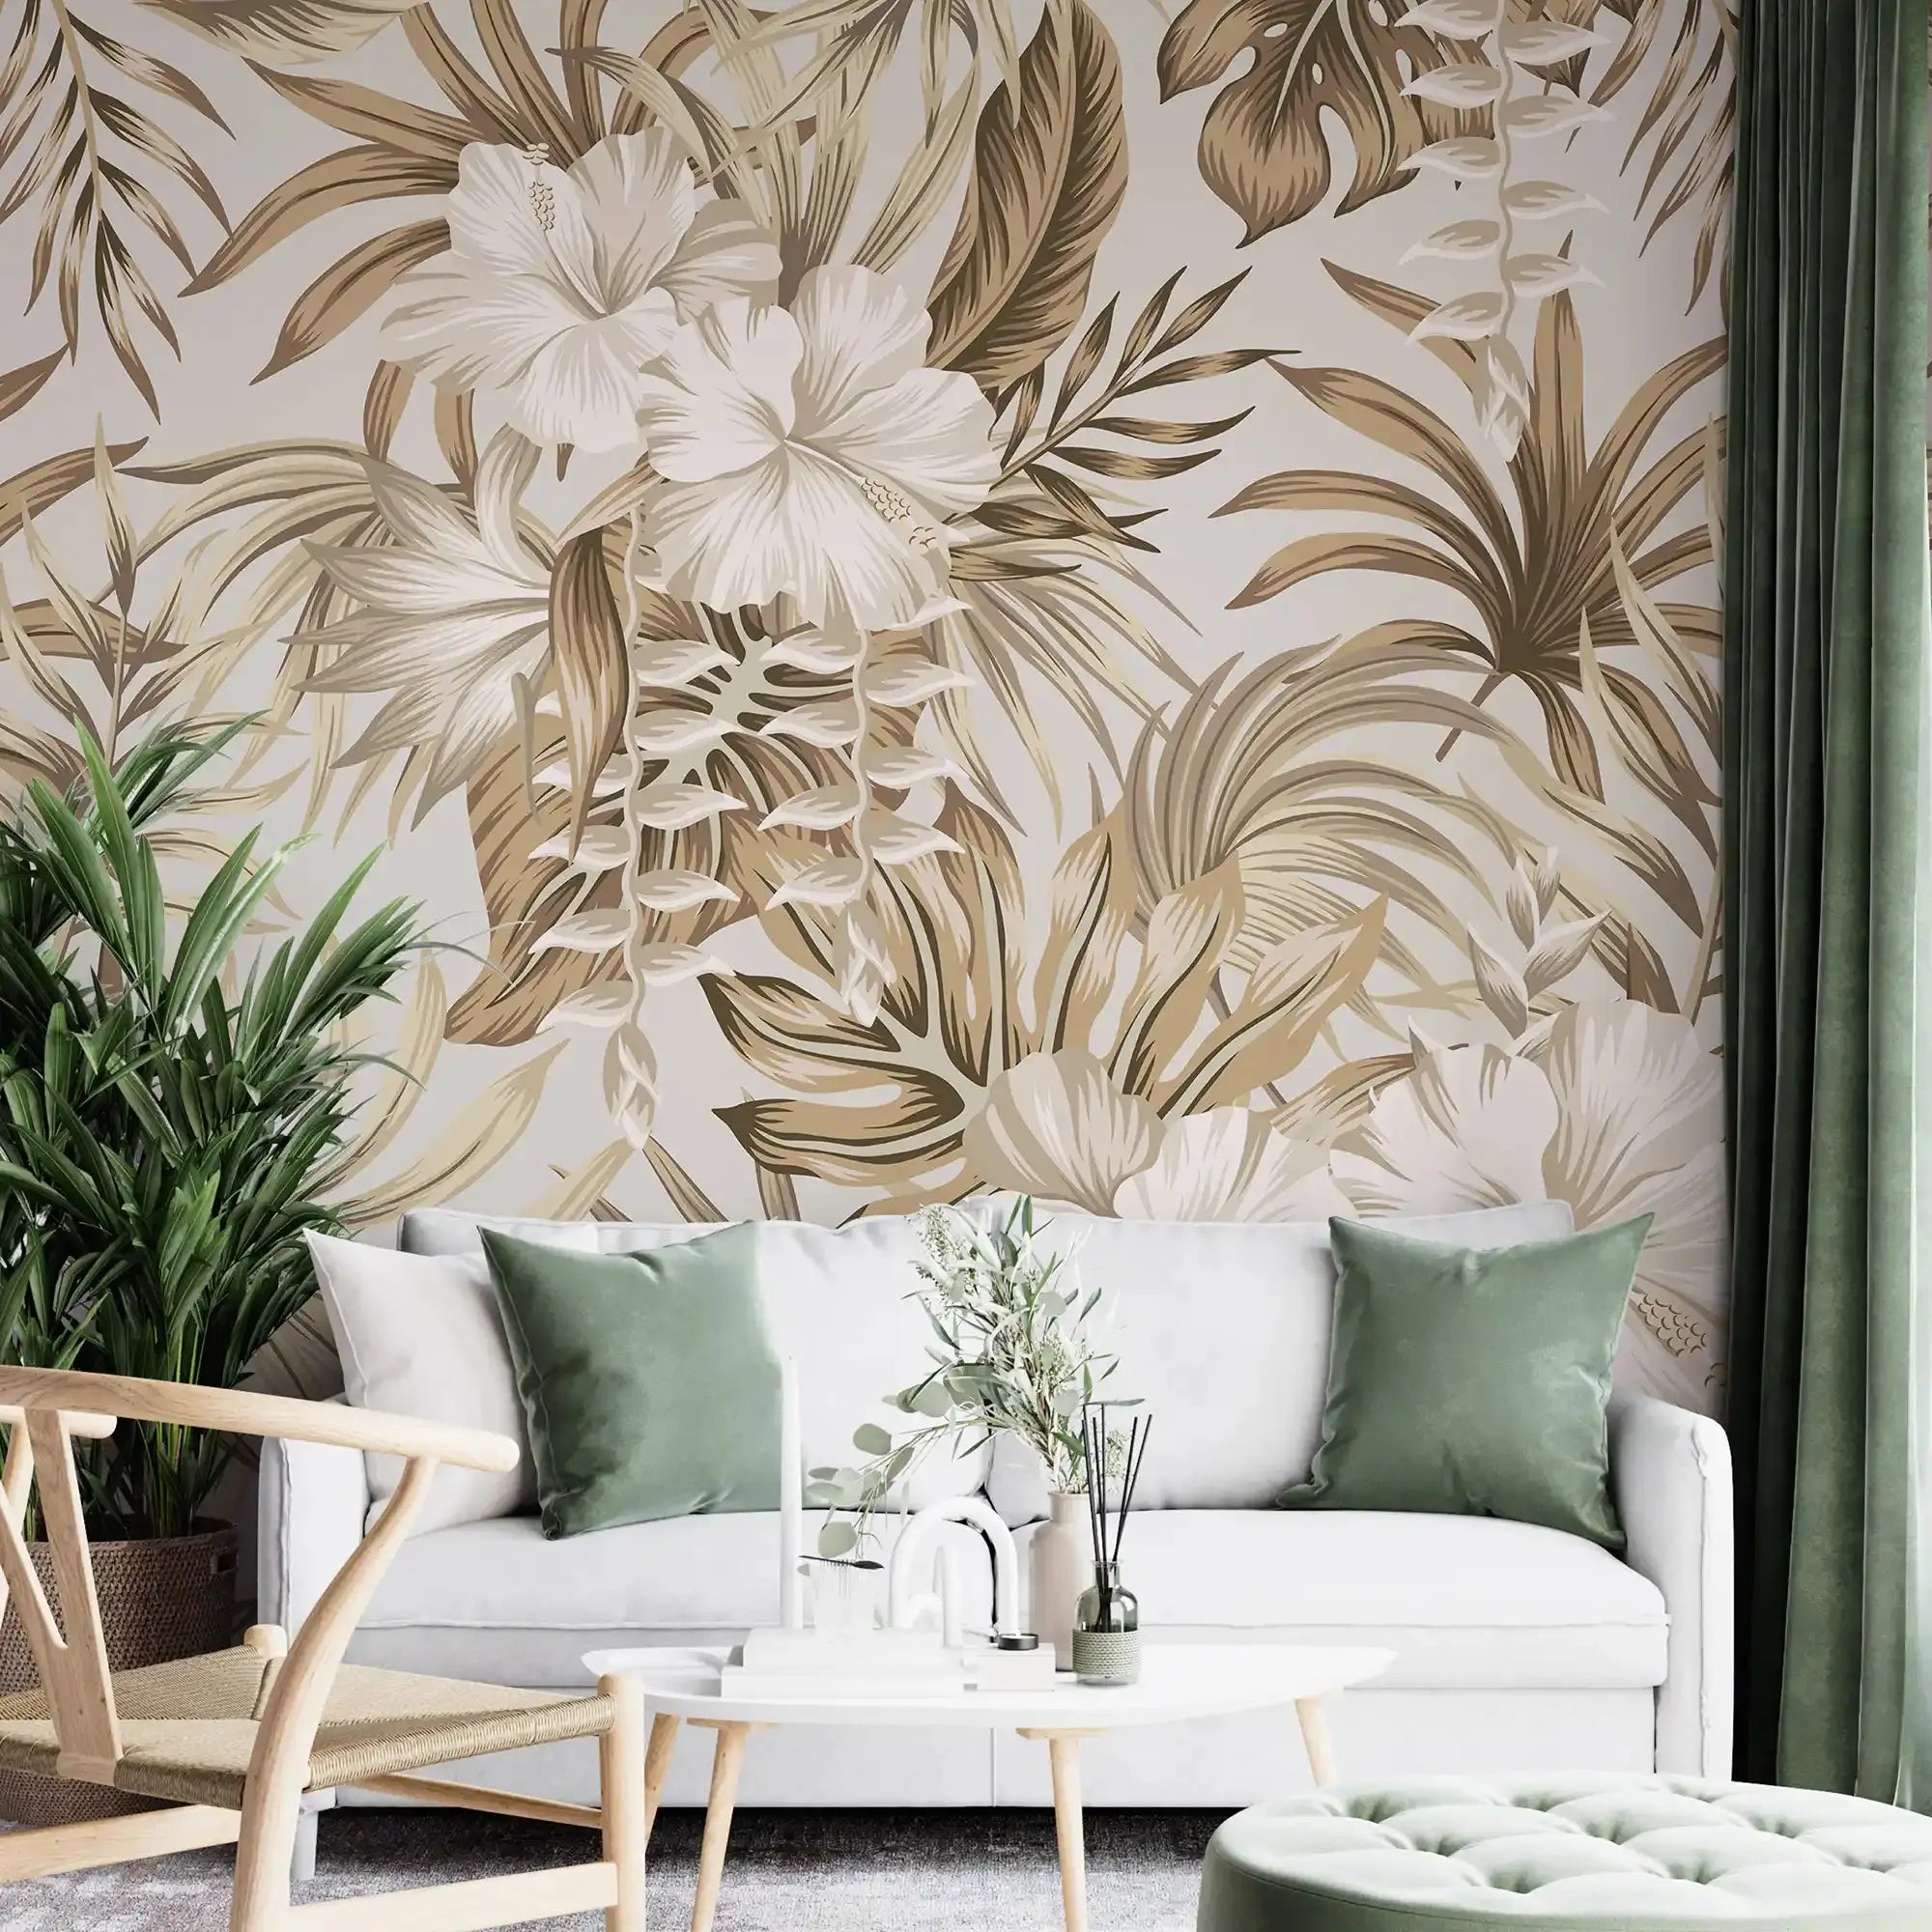 3099-C / Contemporary Floral Peel and Stick Wallpaper, Trendy Tropical Pattern, Adhesive Wall Paper, Easy Installation for Kitchen, Bedroom, Bathroom - Artevella